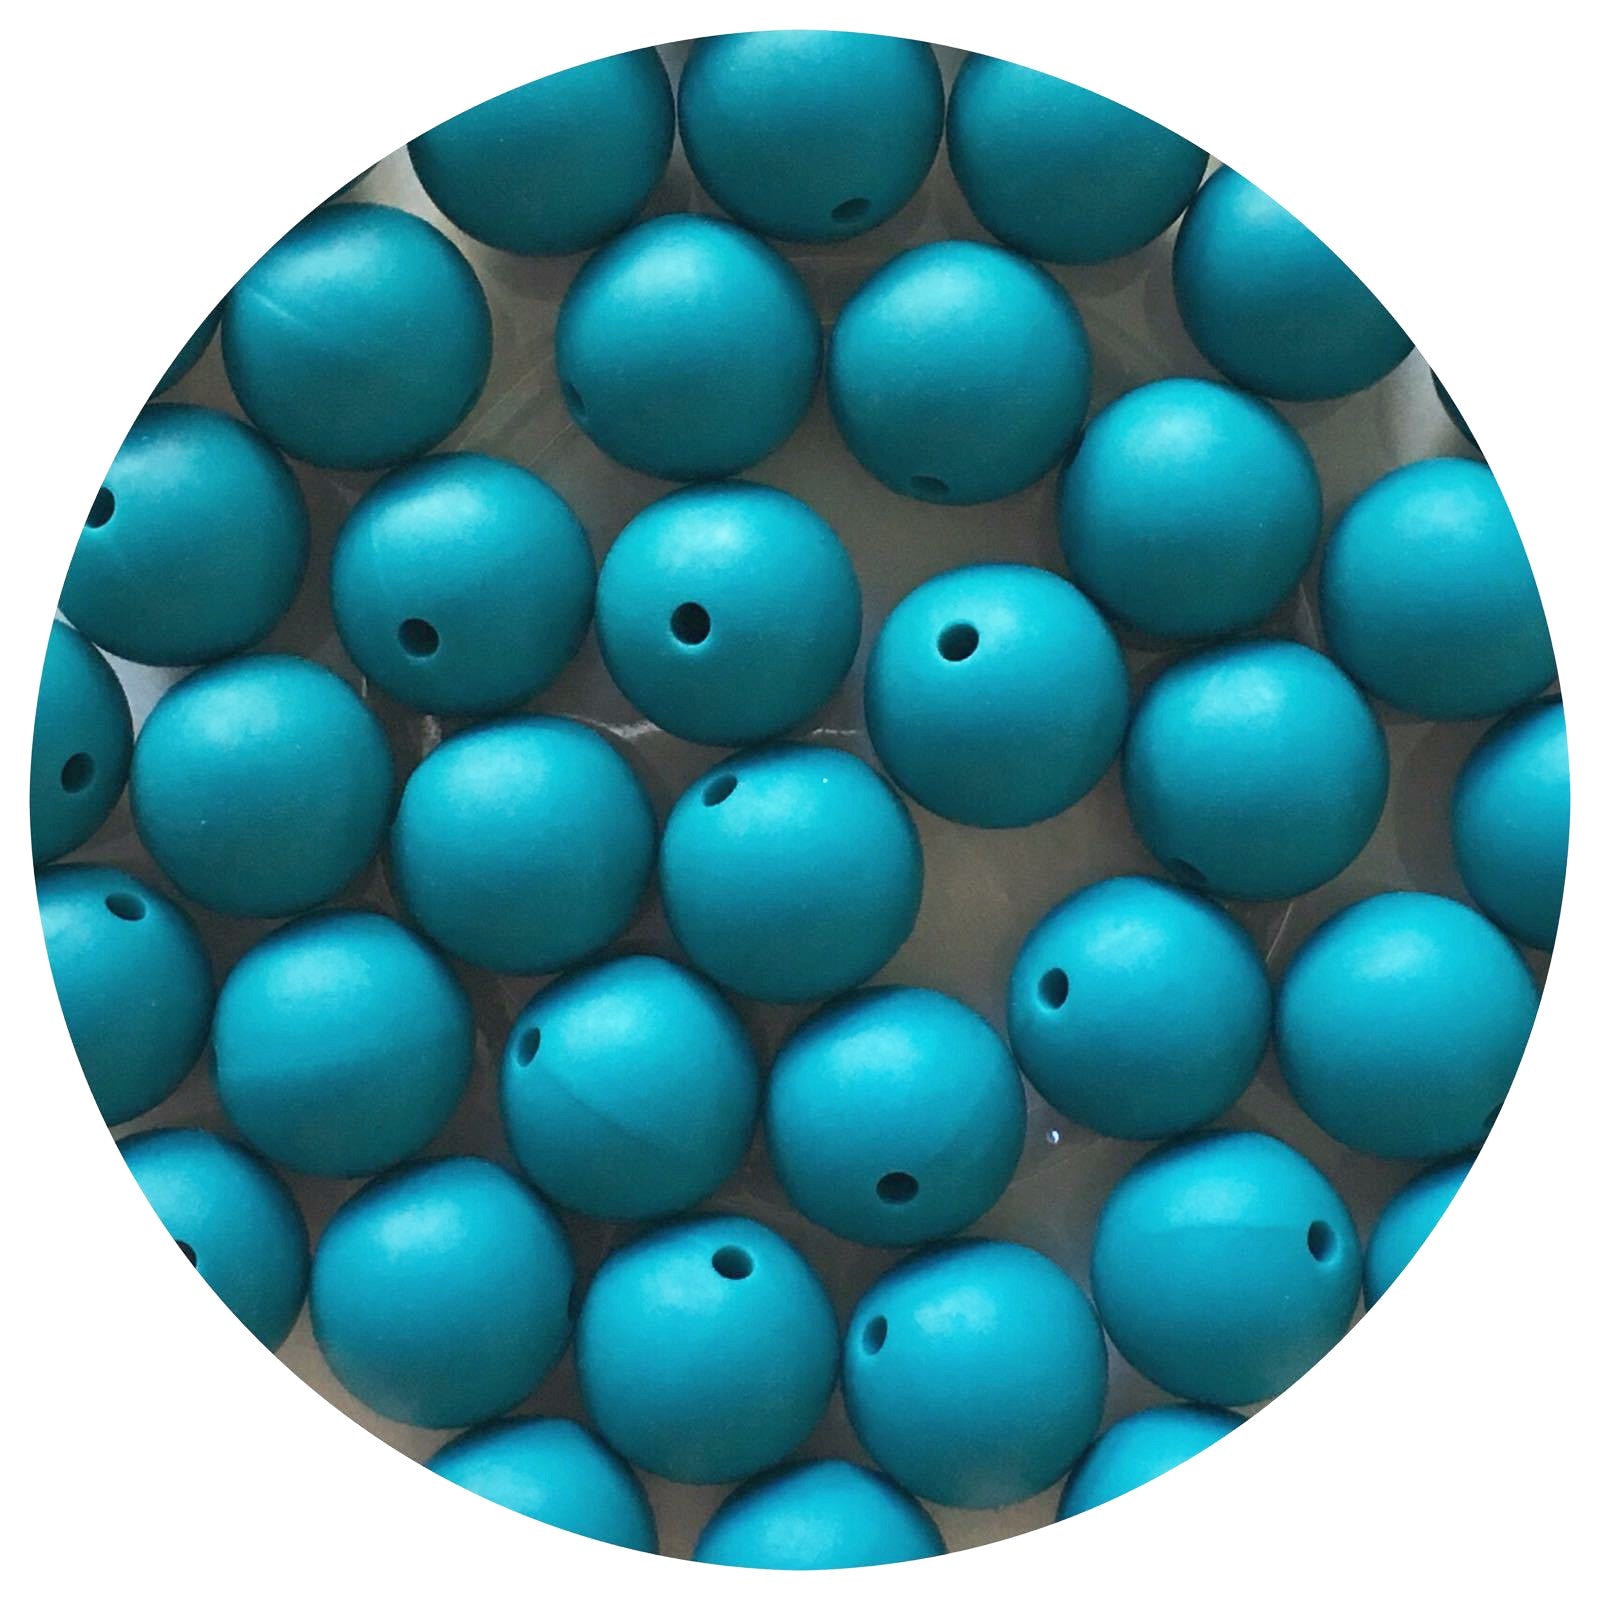 Teal - 15mm round - 10 Beads